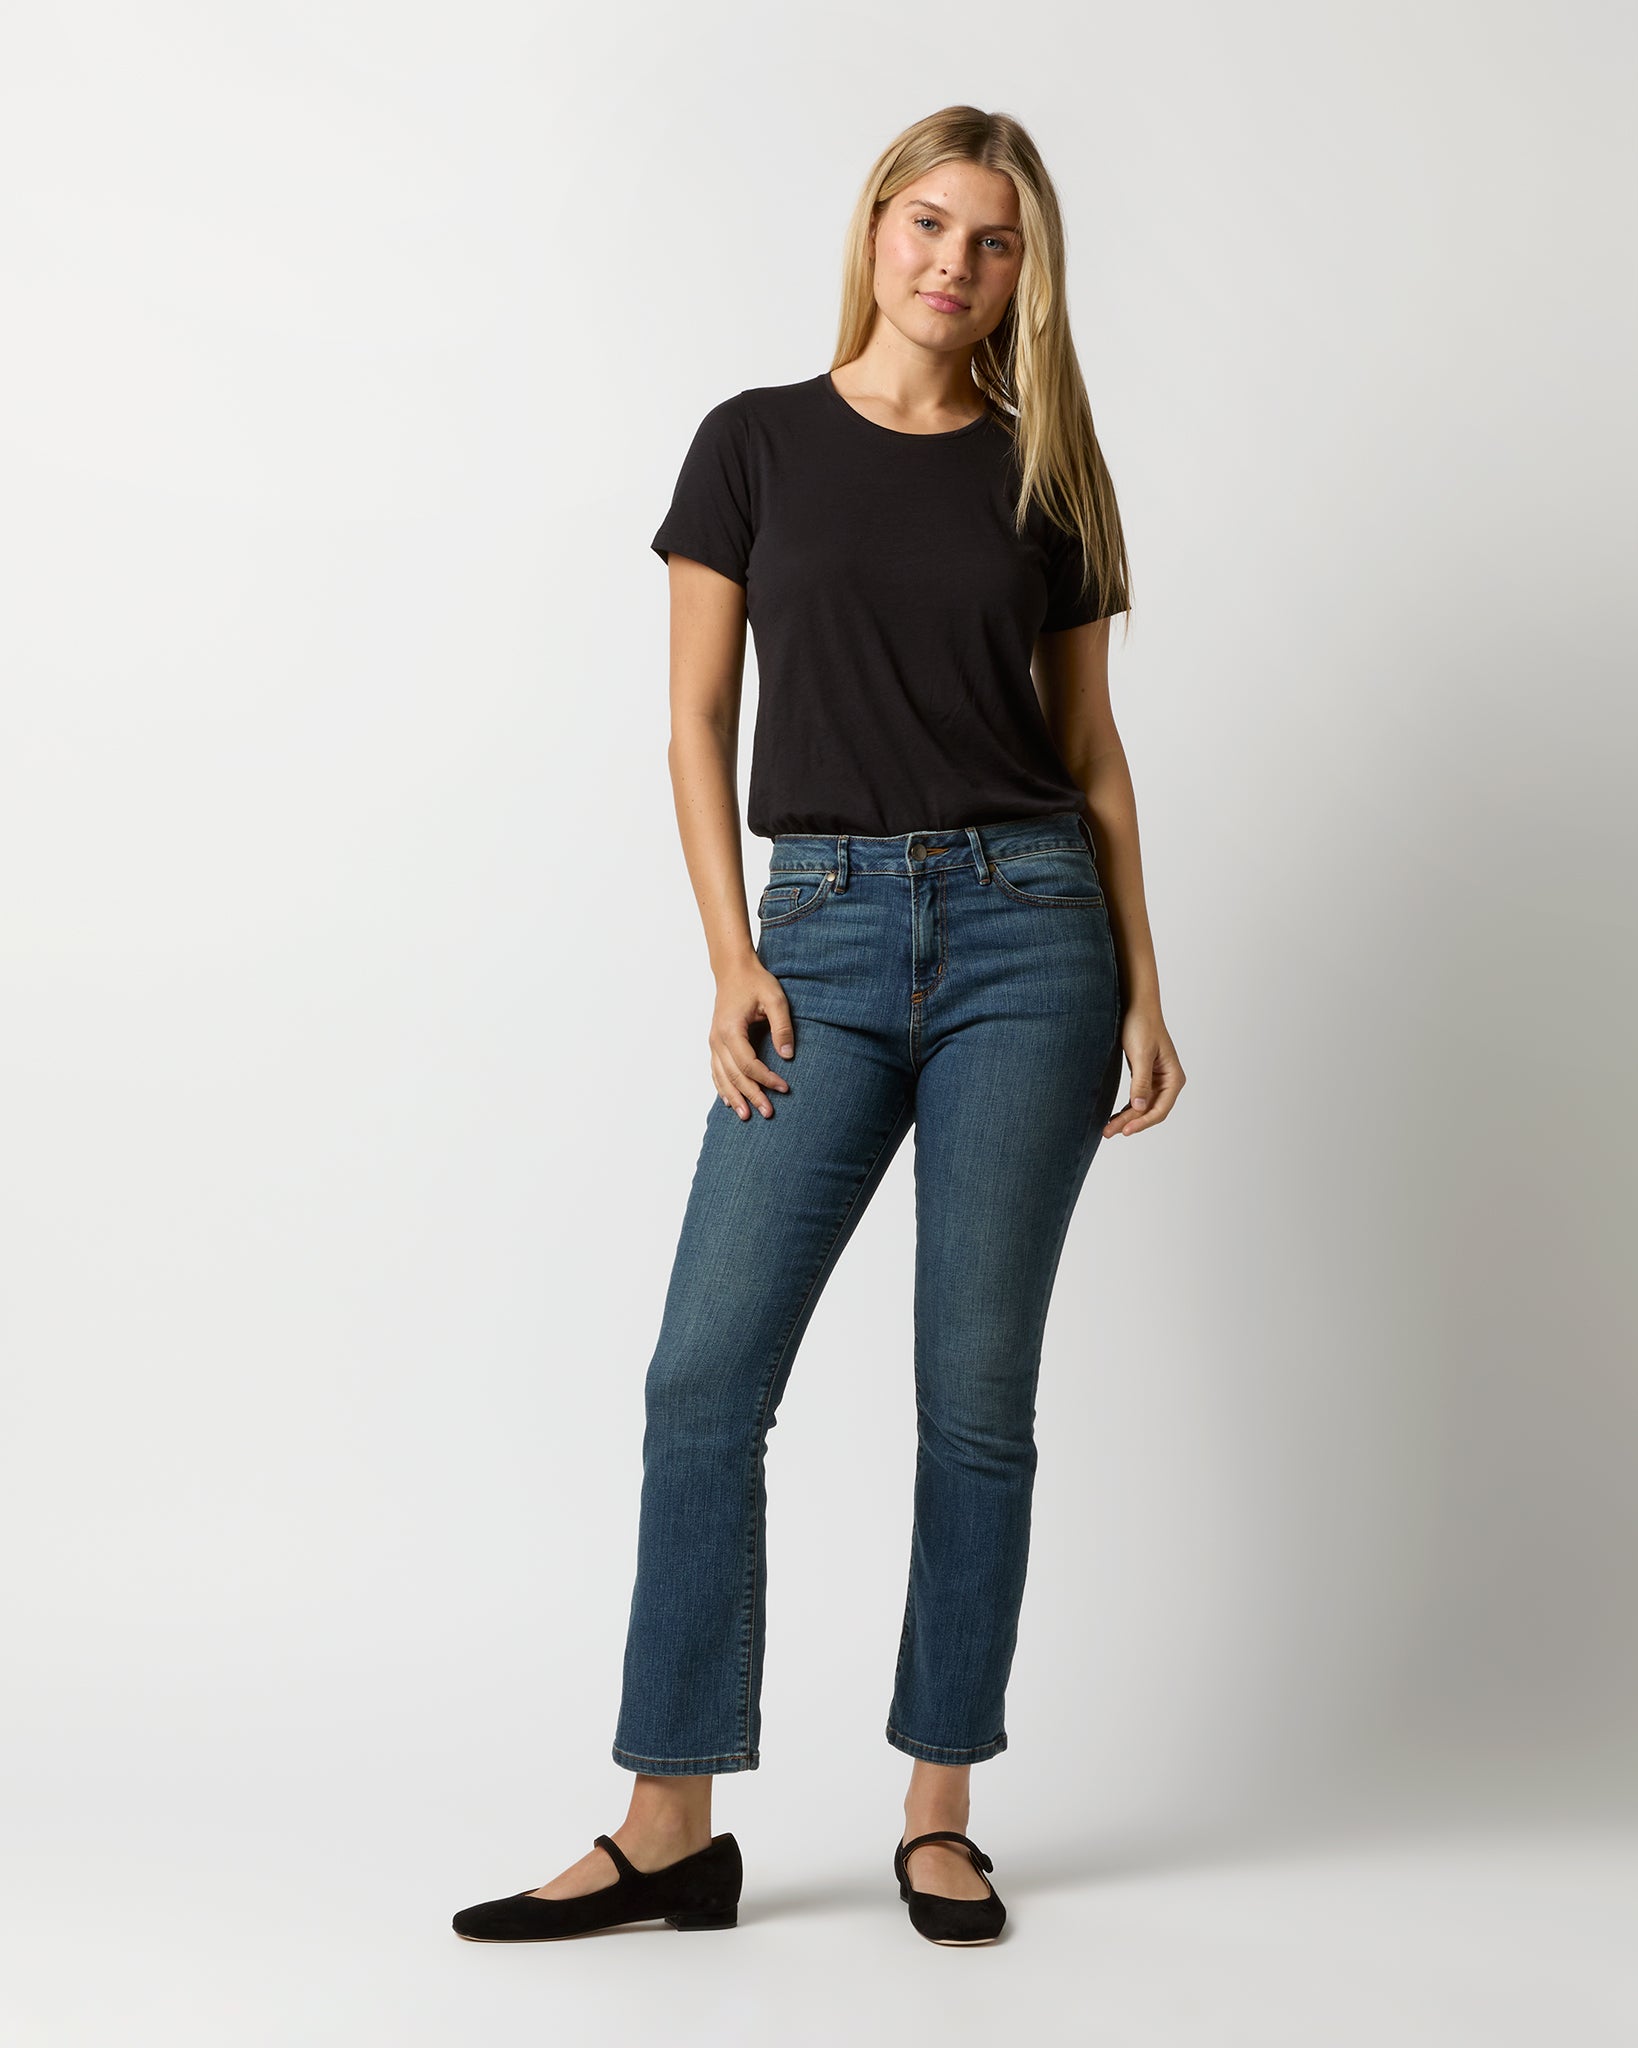 Short-Sleeved Relaxed Tee in Black Pima Cotton